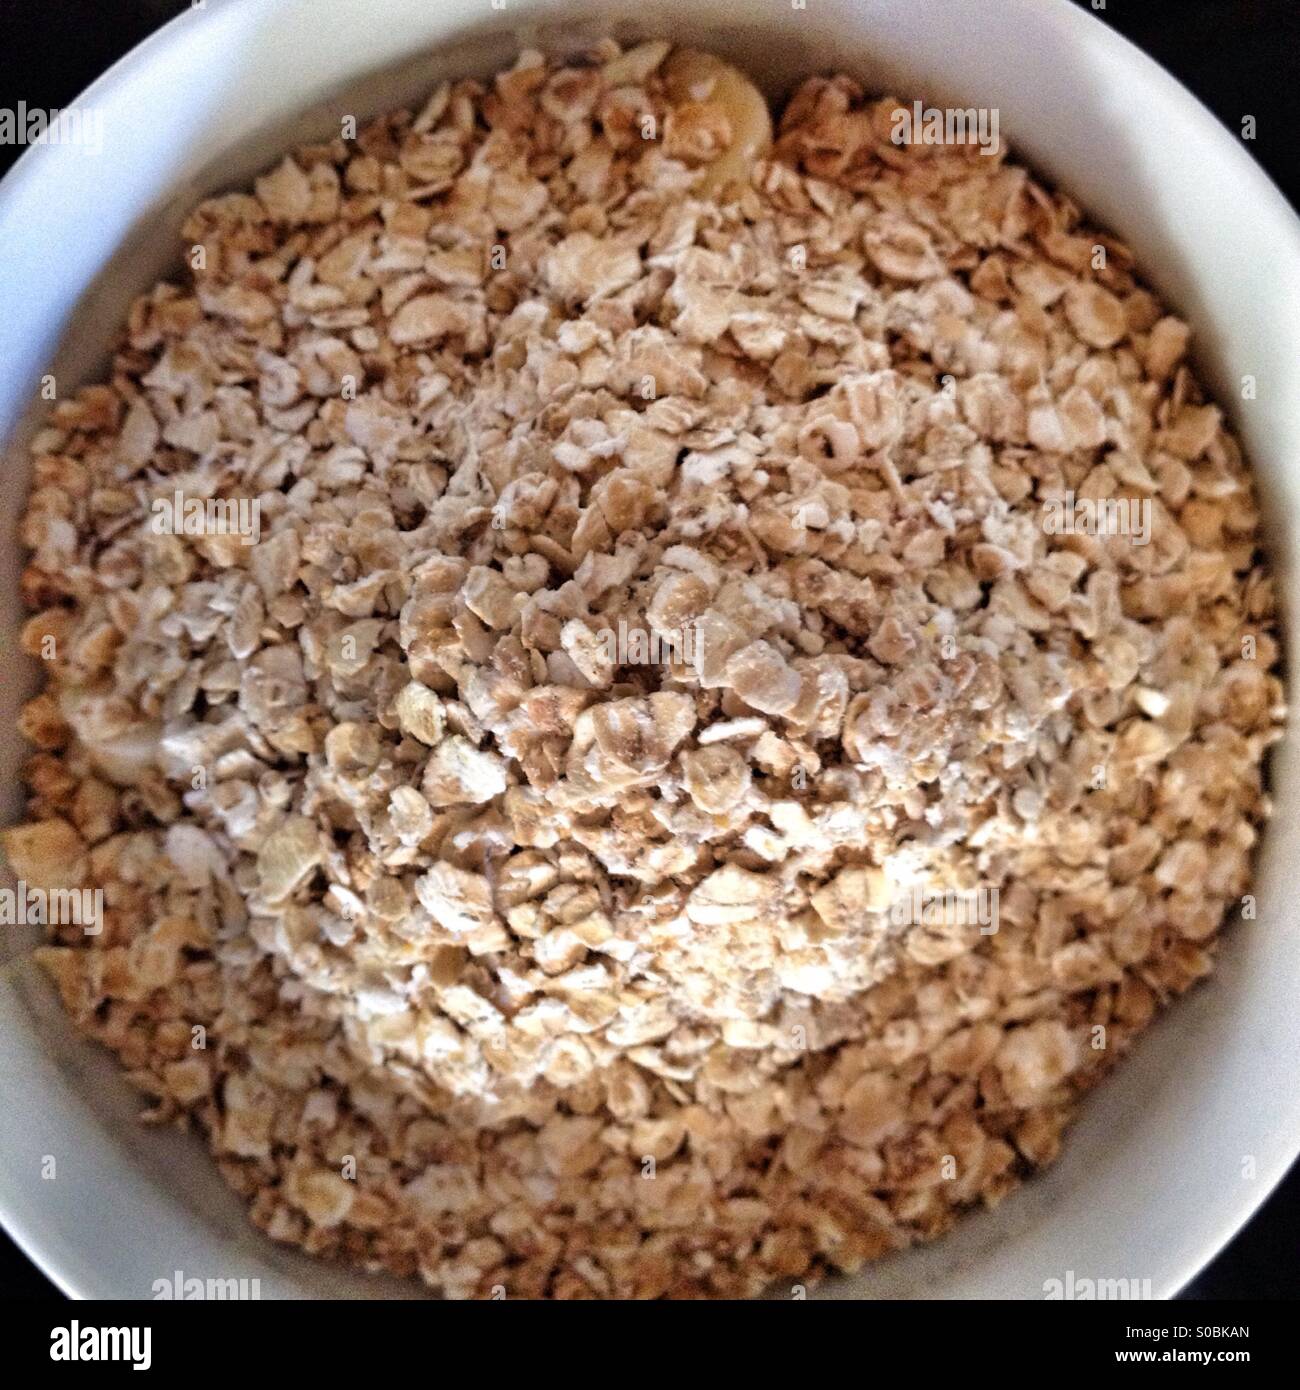 Bowl of oats Stock Photo